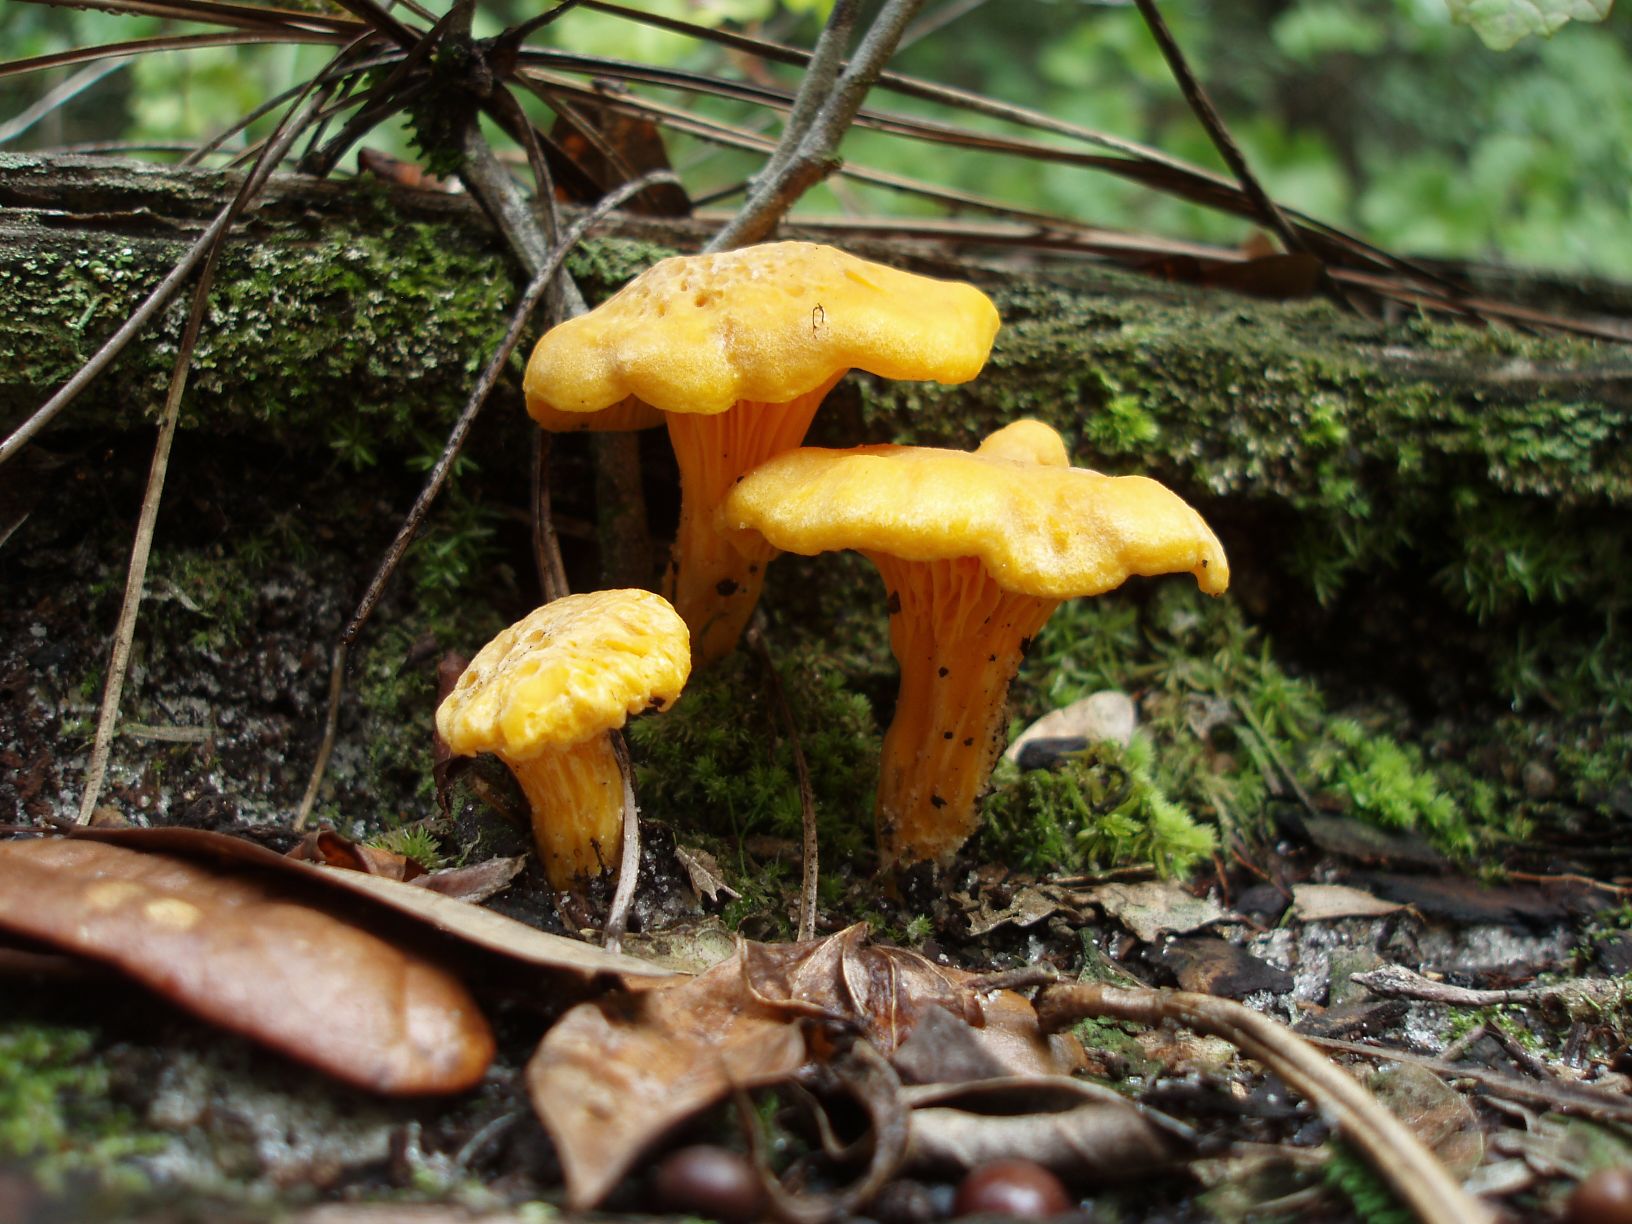 The hunt for the mighty south florida chanterelle - Mushroom Hunting ...